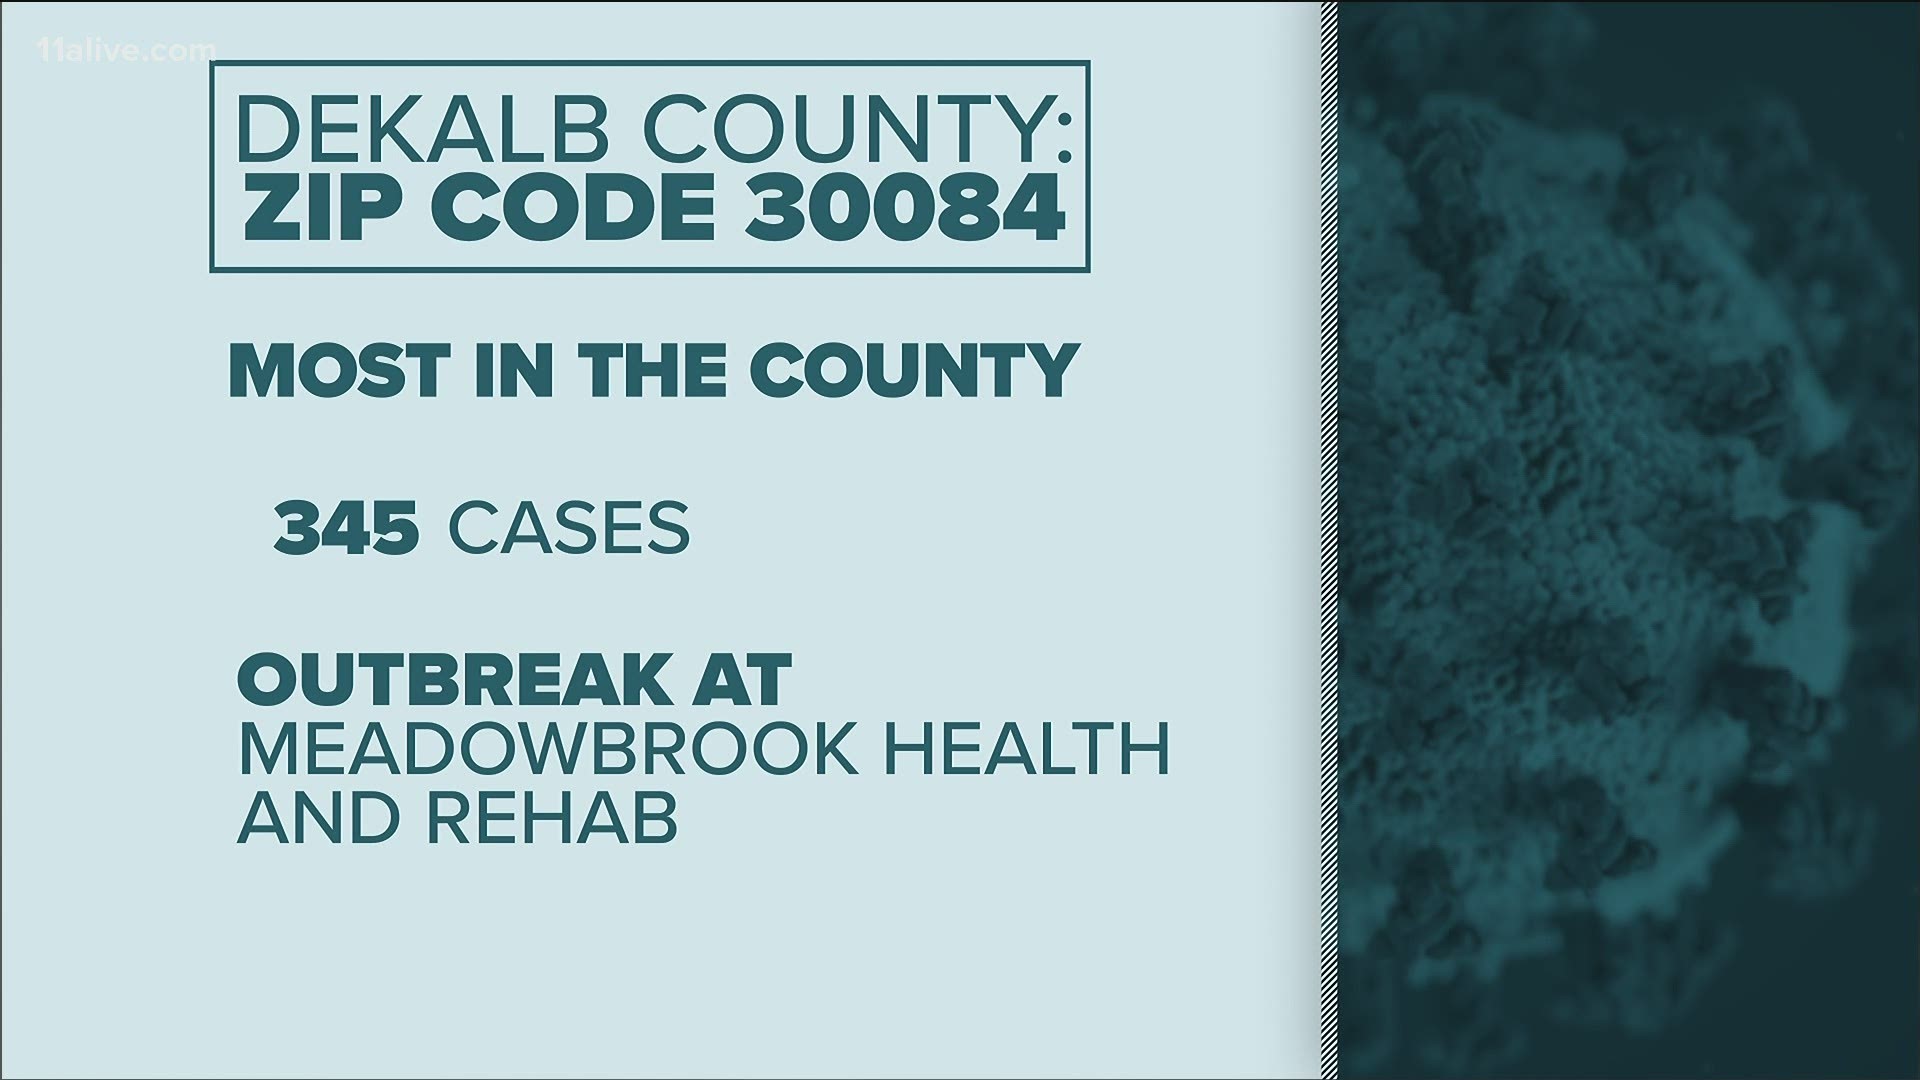 While the spread of the virus seems to be increasing the most in Gwinnett County, DeKalb is also seeing quite a few zip codes with a growing number of new cases.